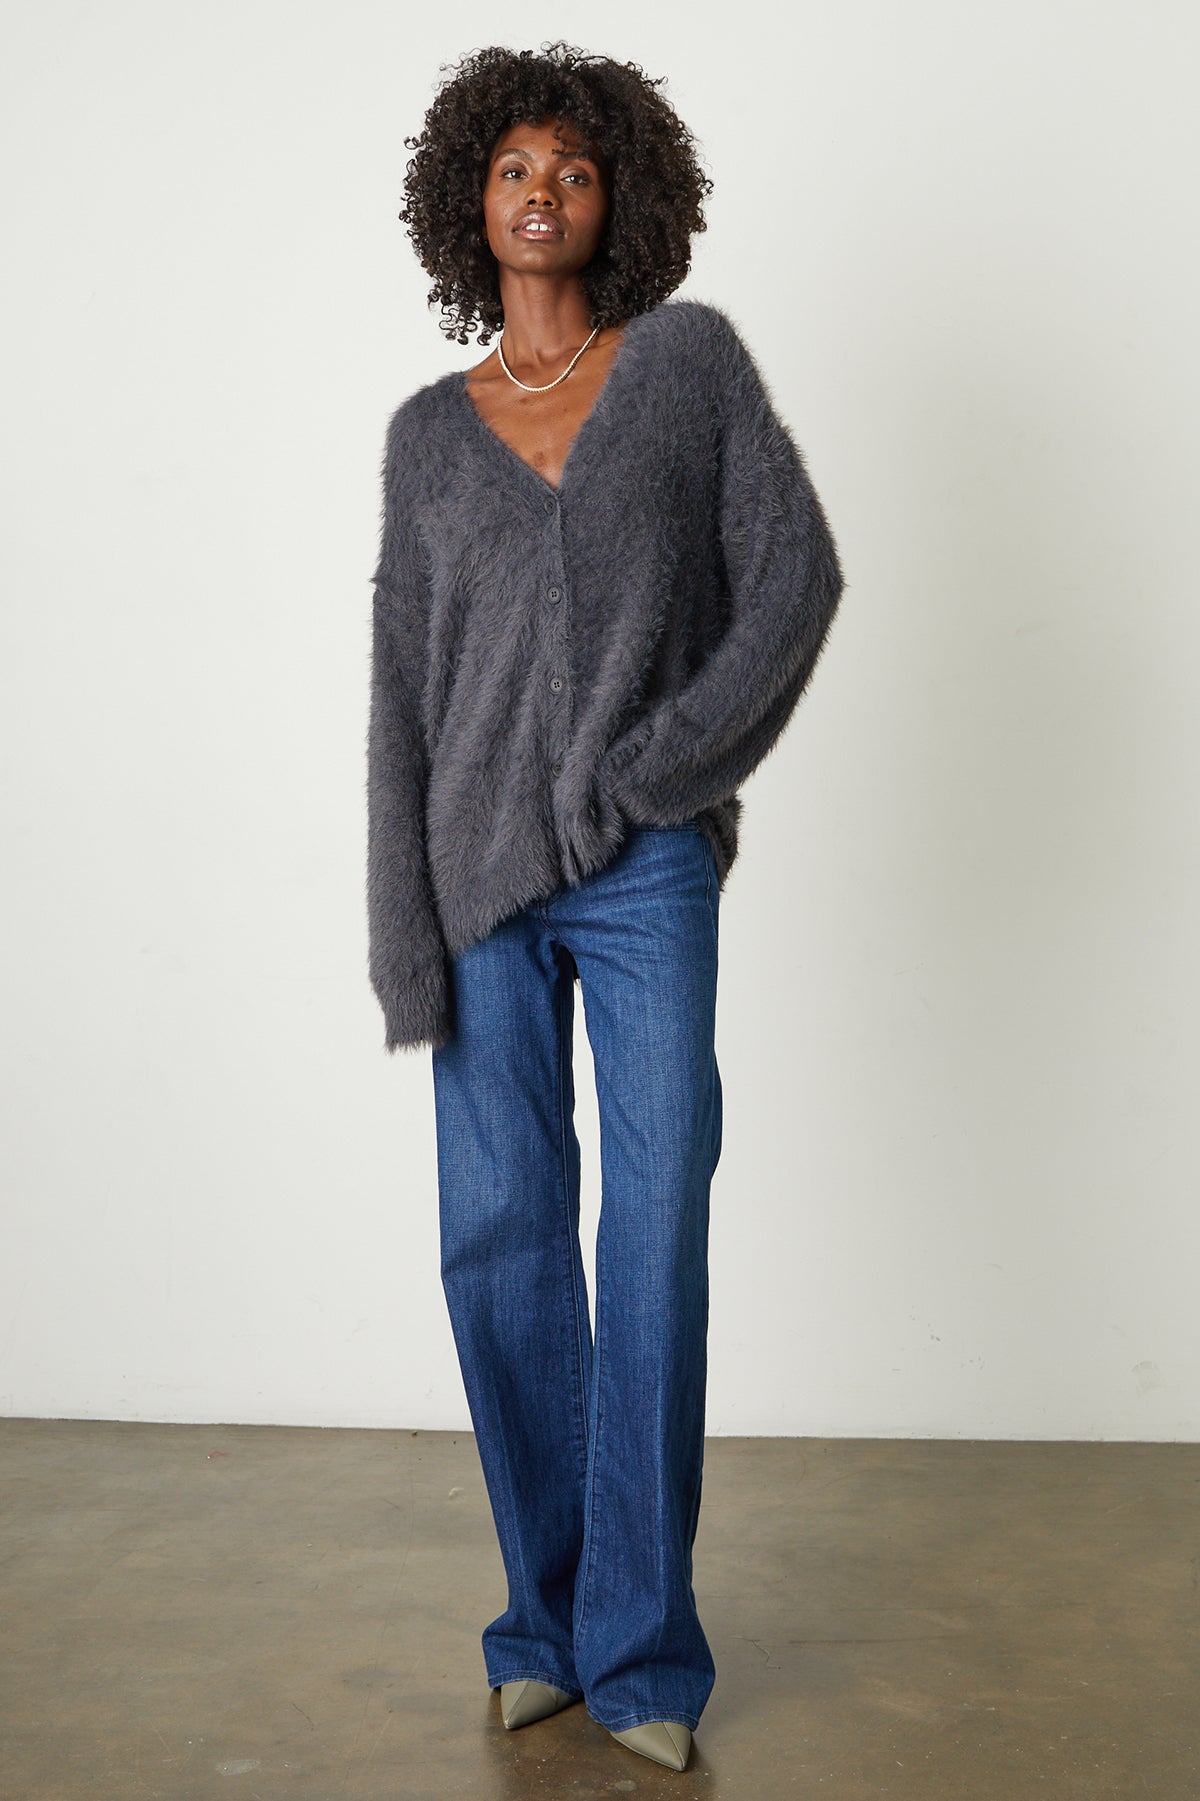 Barb Feather Yarn Button Front Cardigan in charcoal grey with blue denim and heels full length front-25548654969025